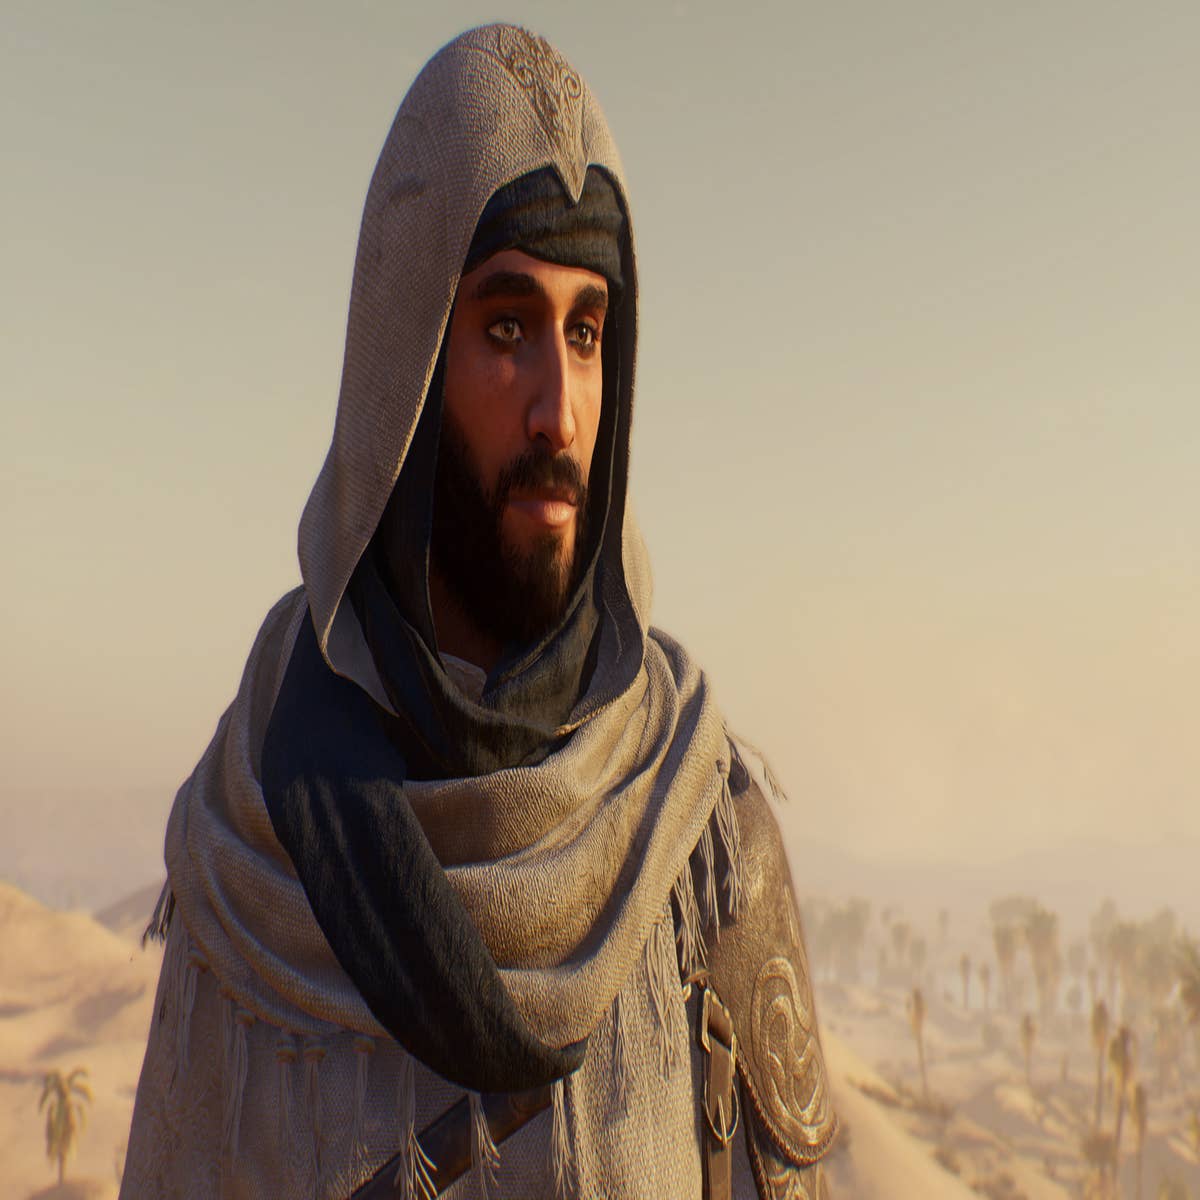 Assassin's Creed Origins PC performance review: a port as strong